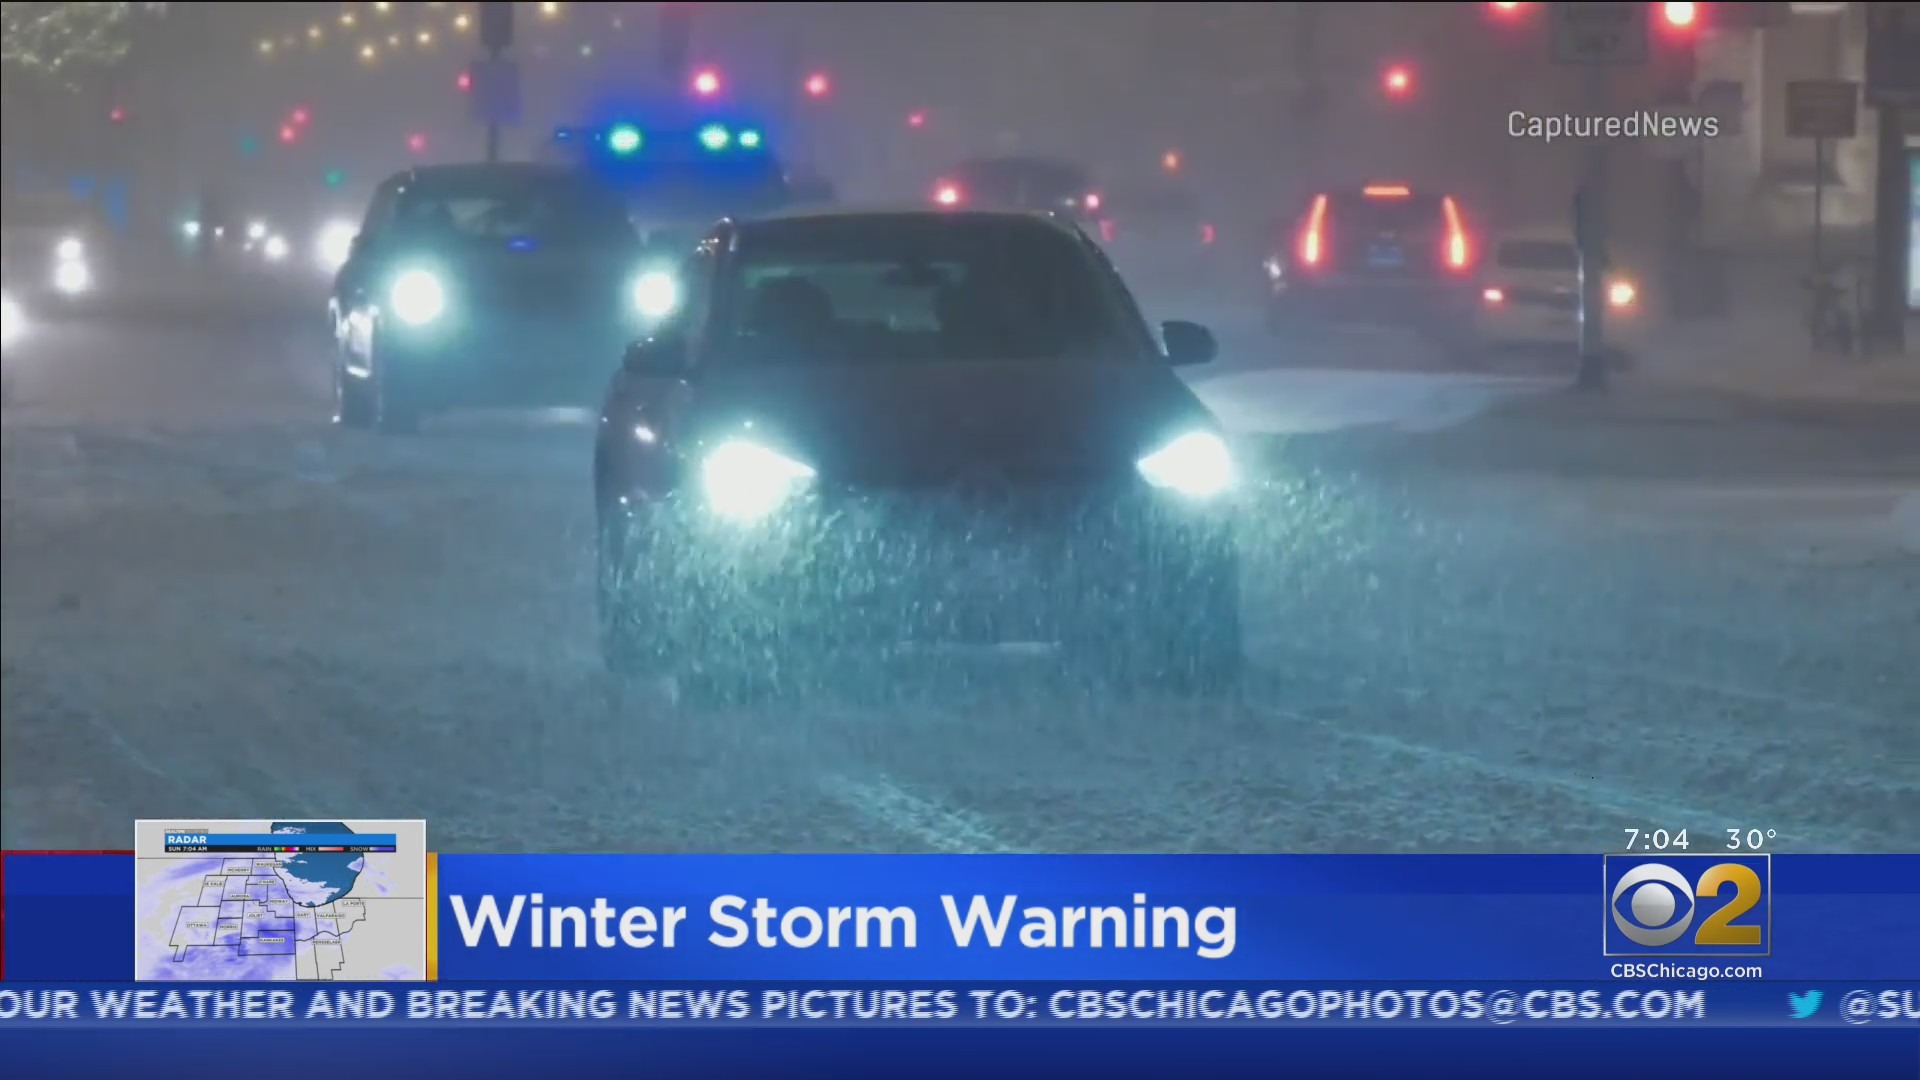 Heavy Snow Creating Difficult Travel Conditions In Chicago Area - CBS Chicago